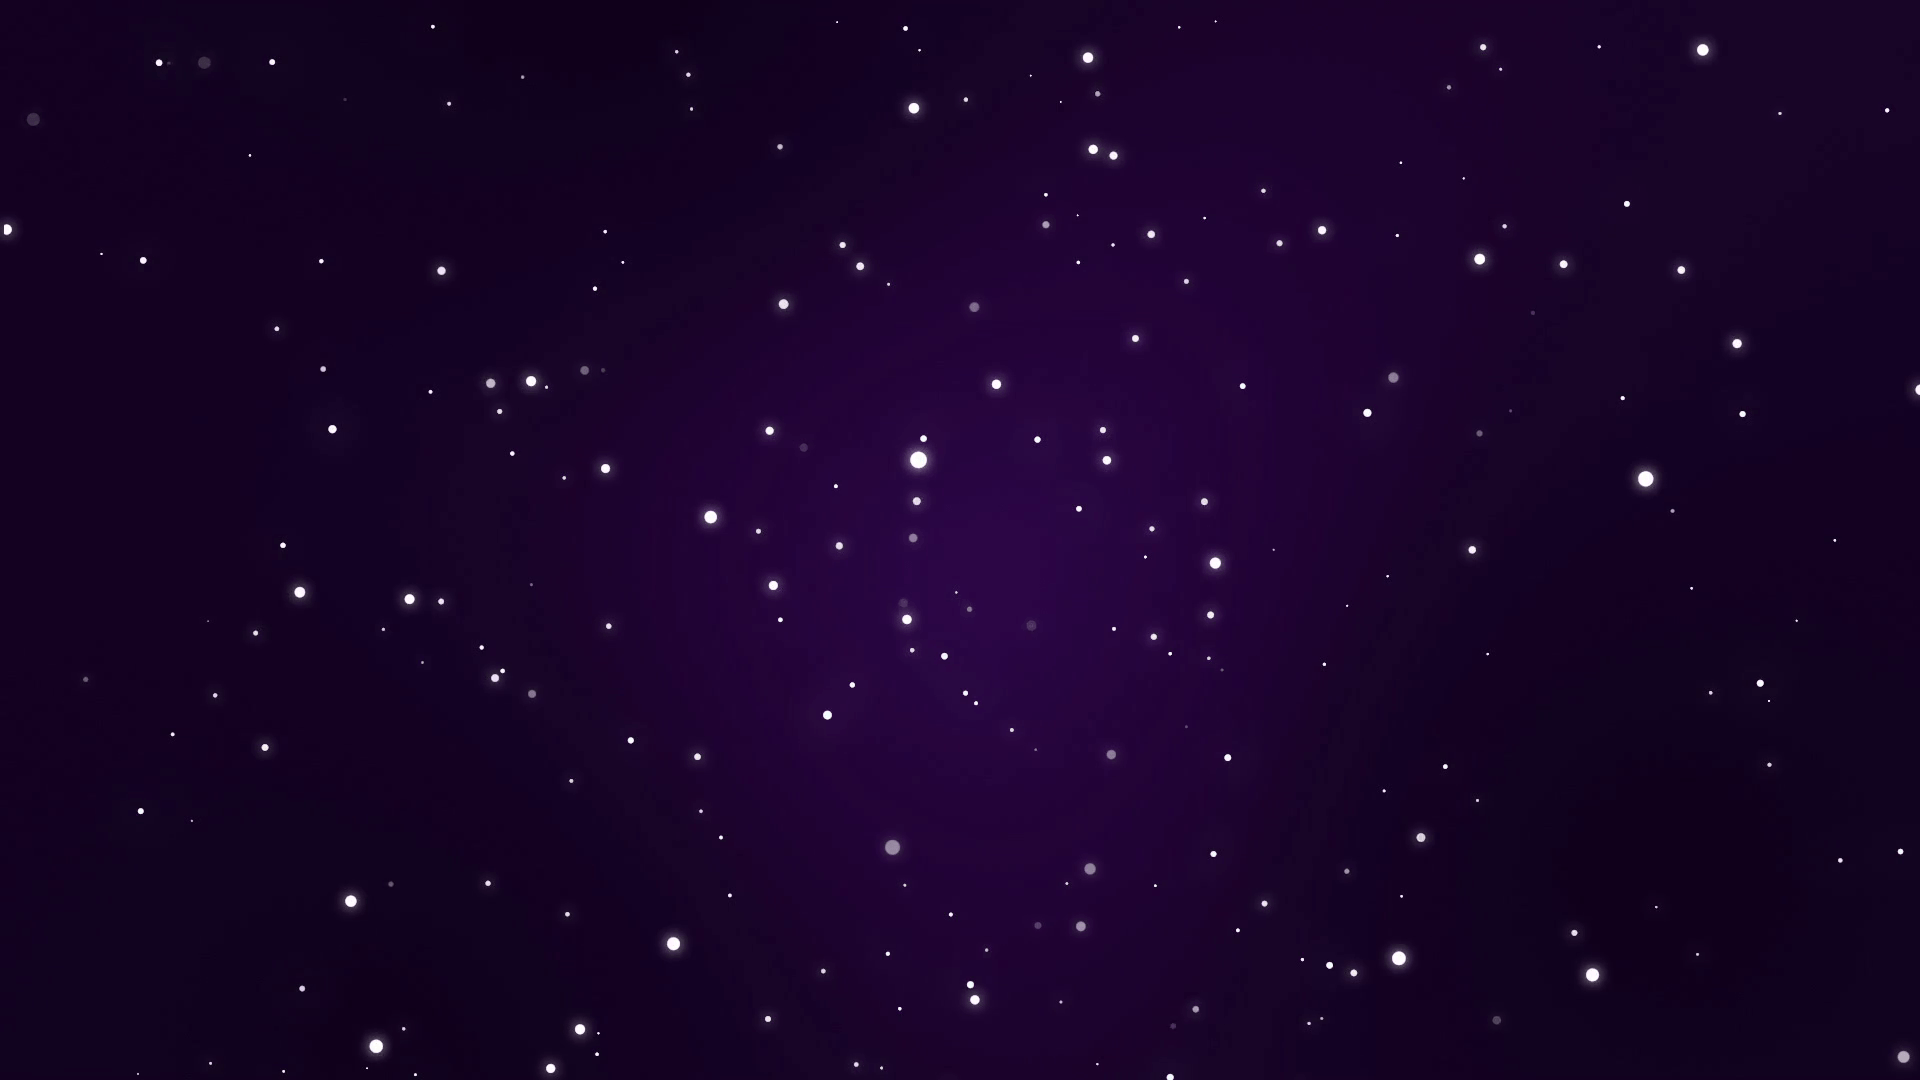 Starry night sky animation with light particles flickering on purple